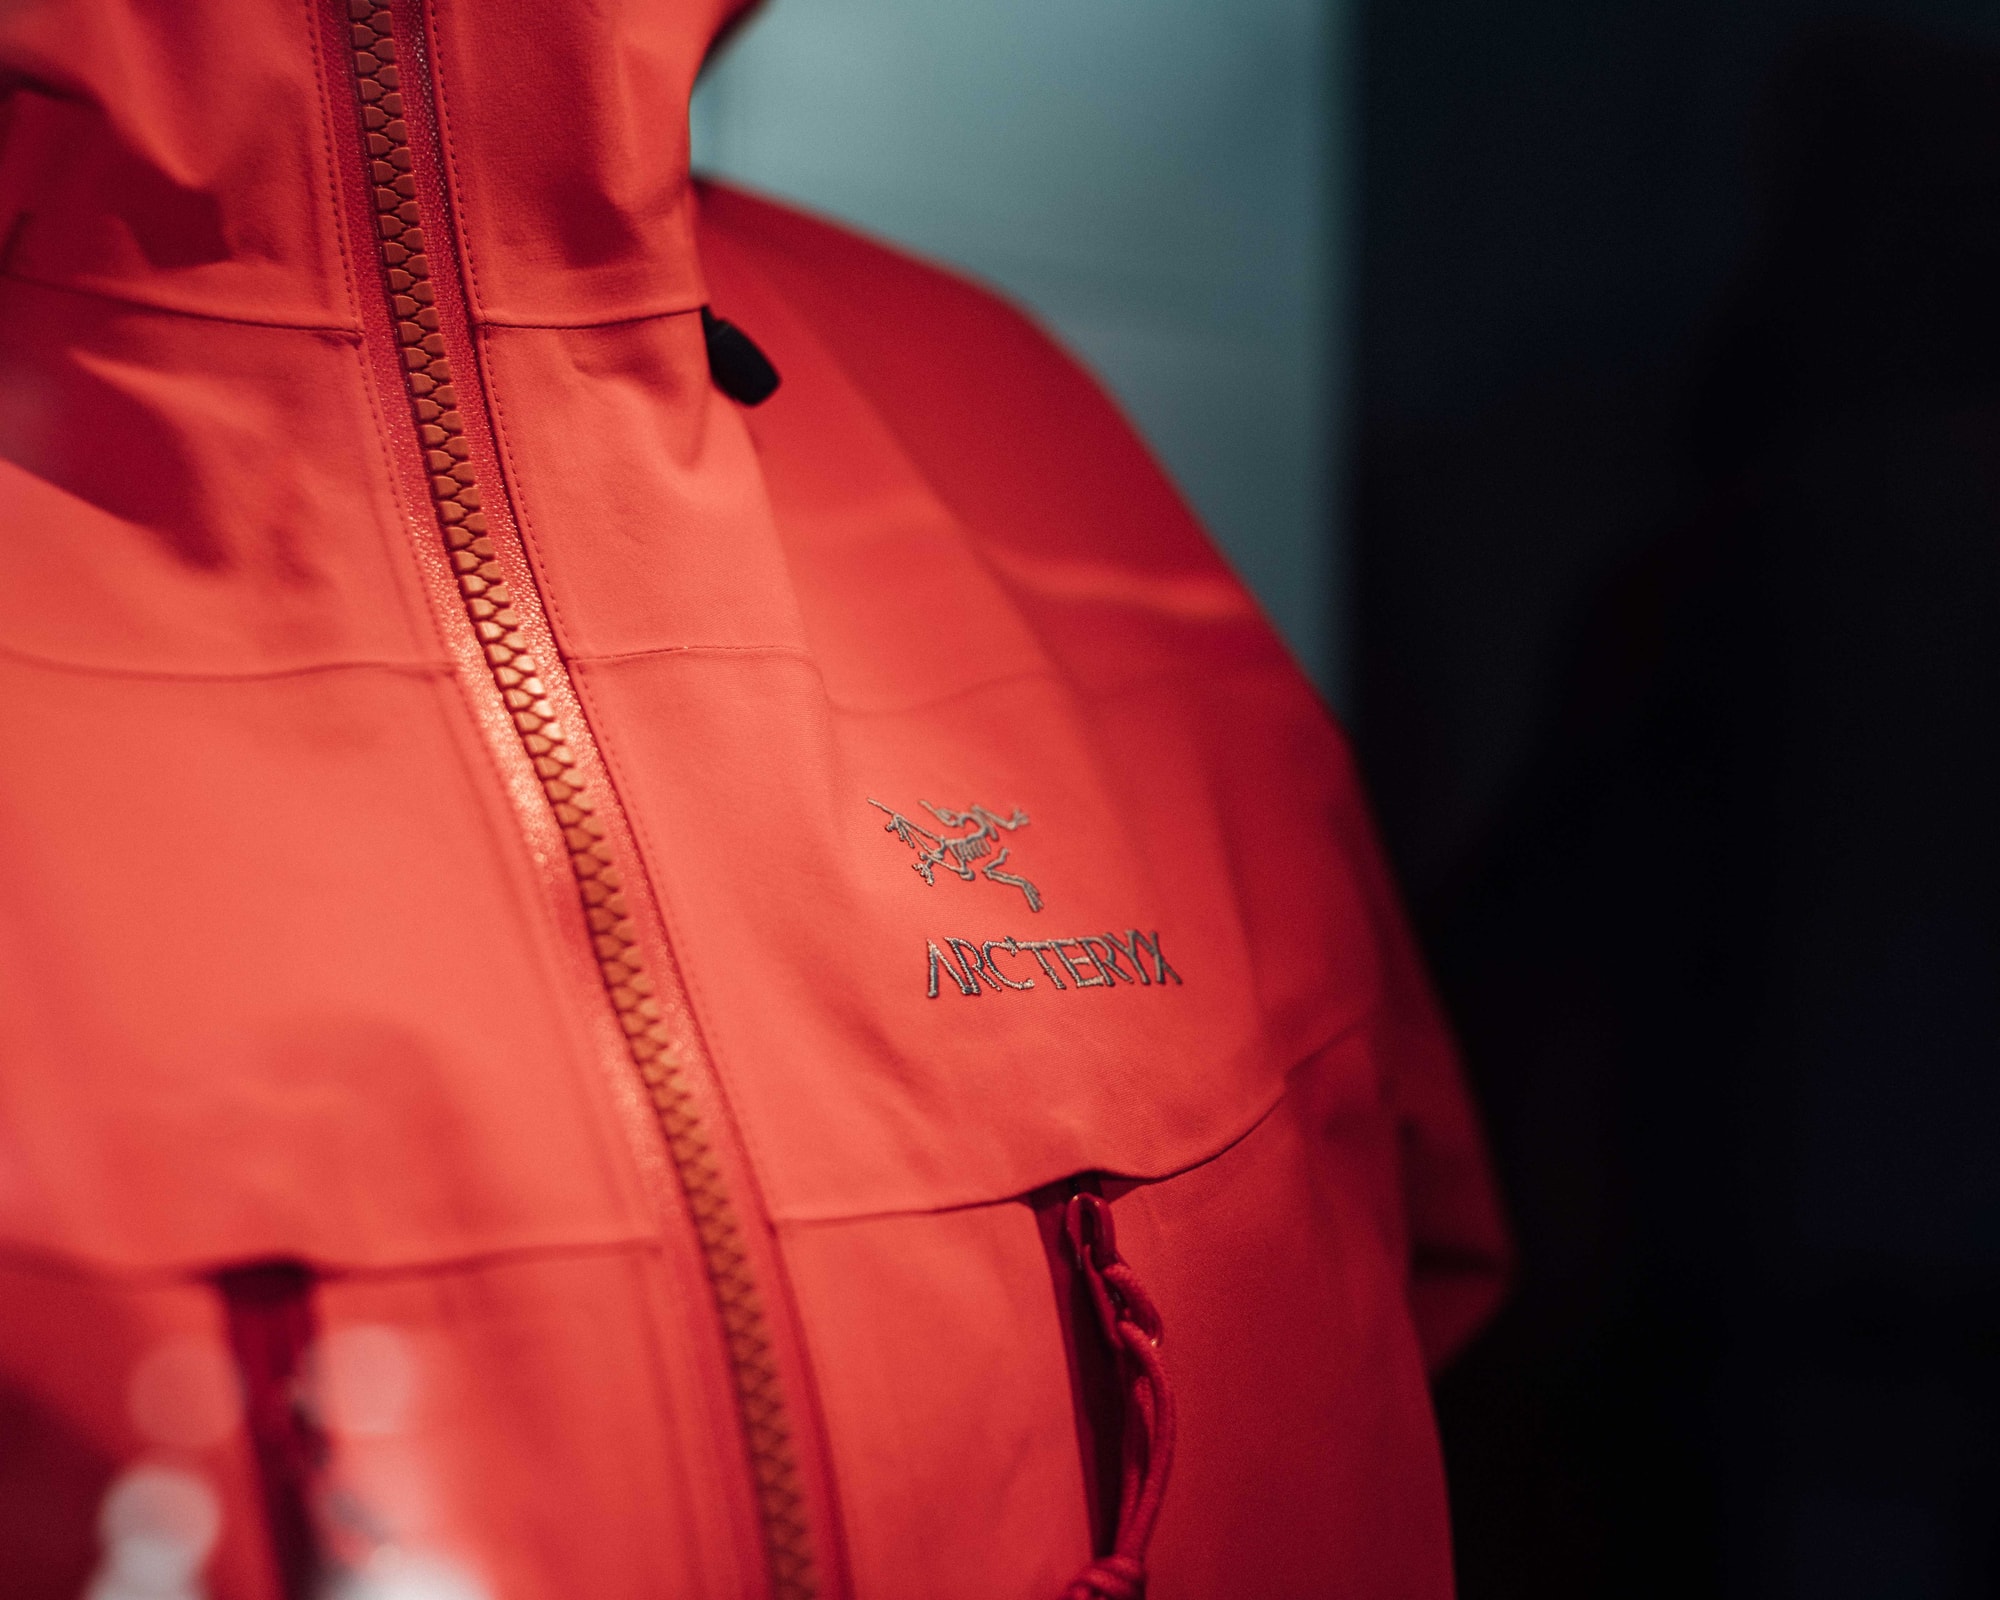 Arc'teryx Couldn't Care Less About the Hype